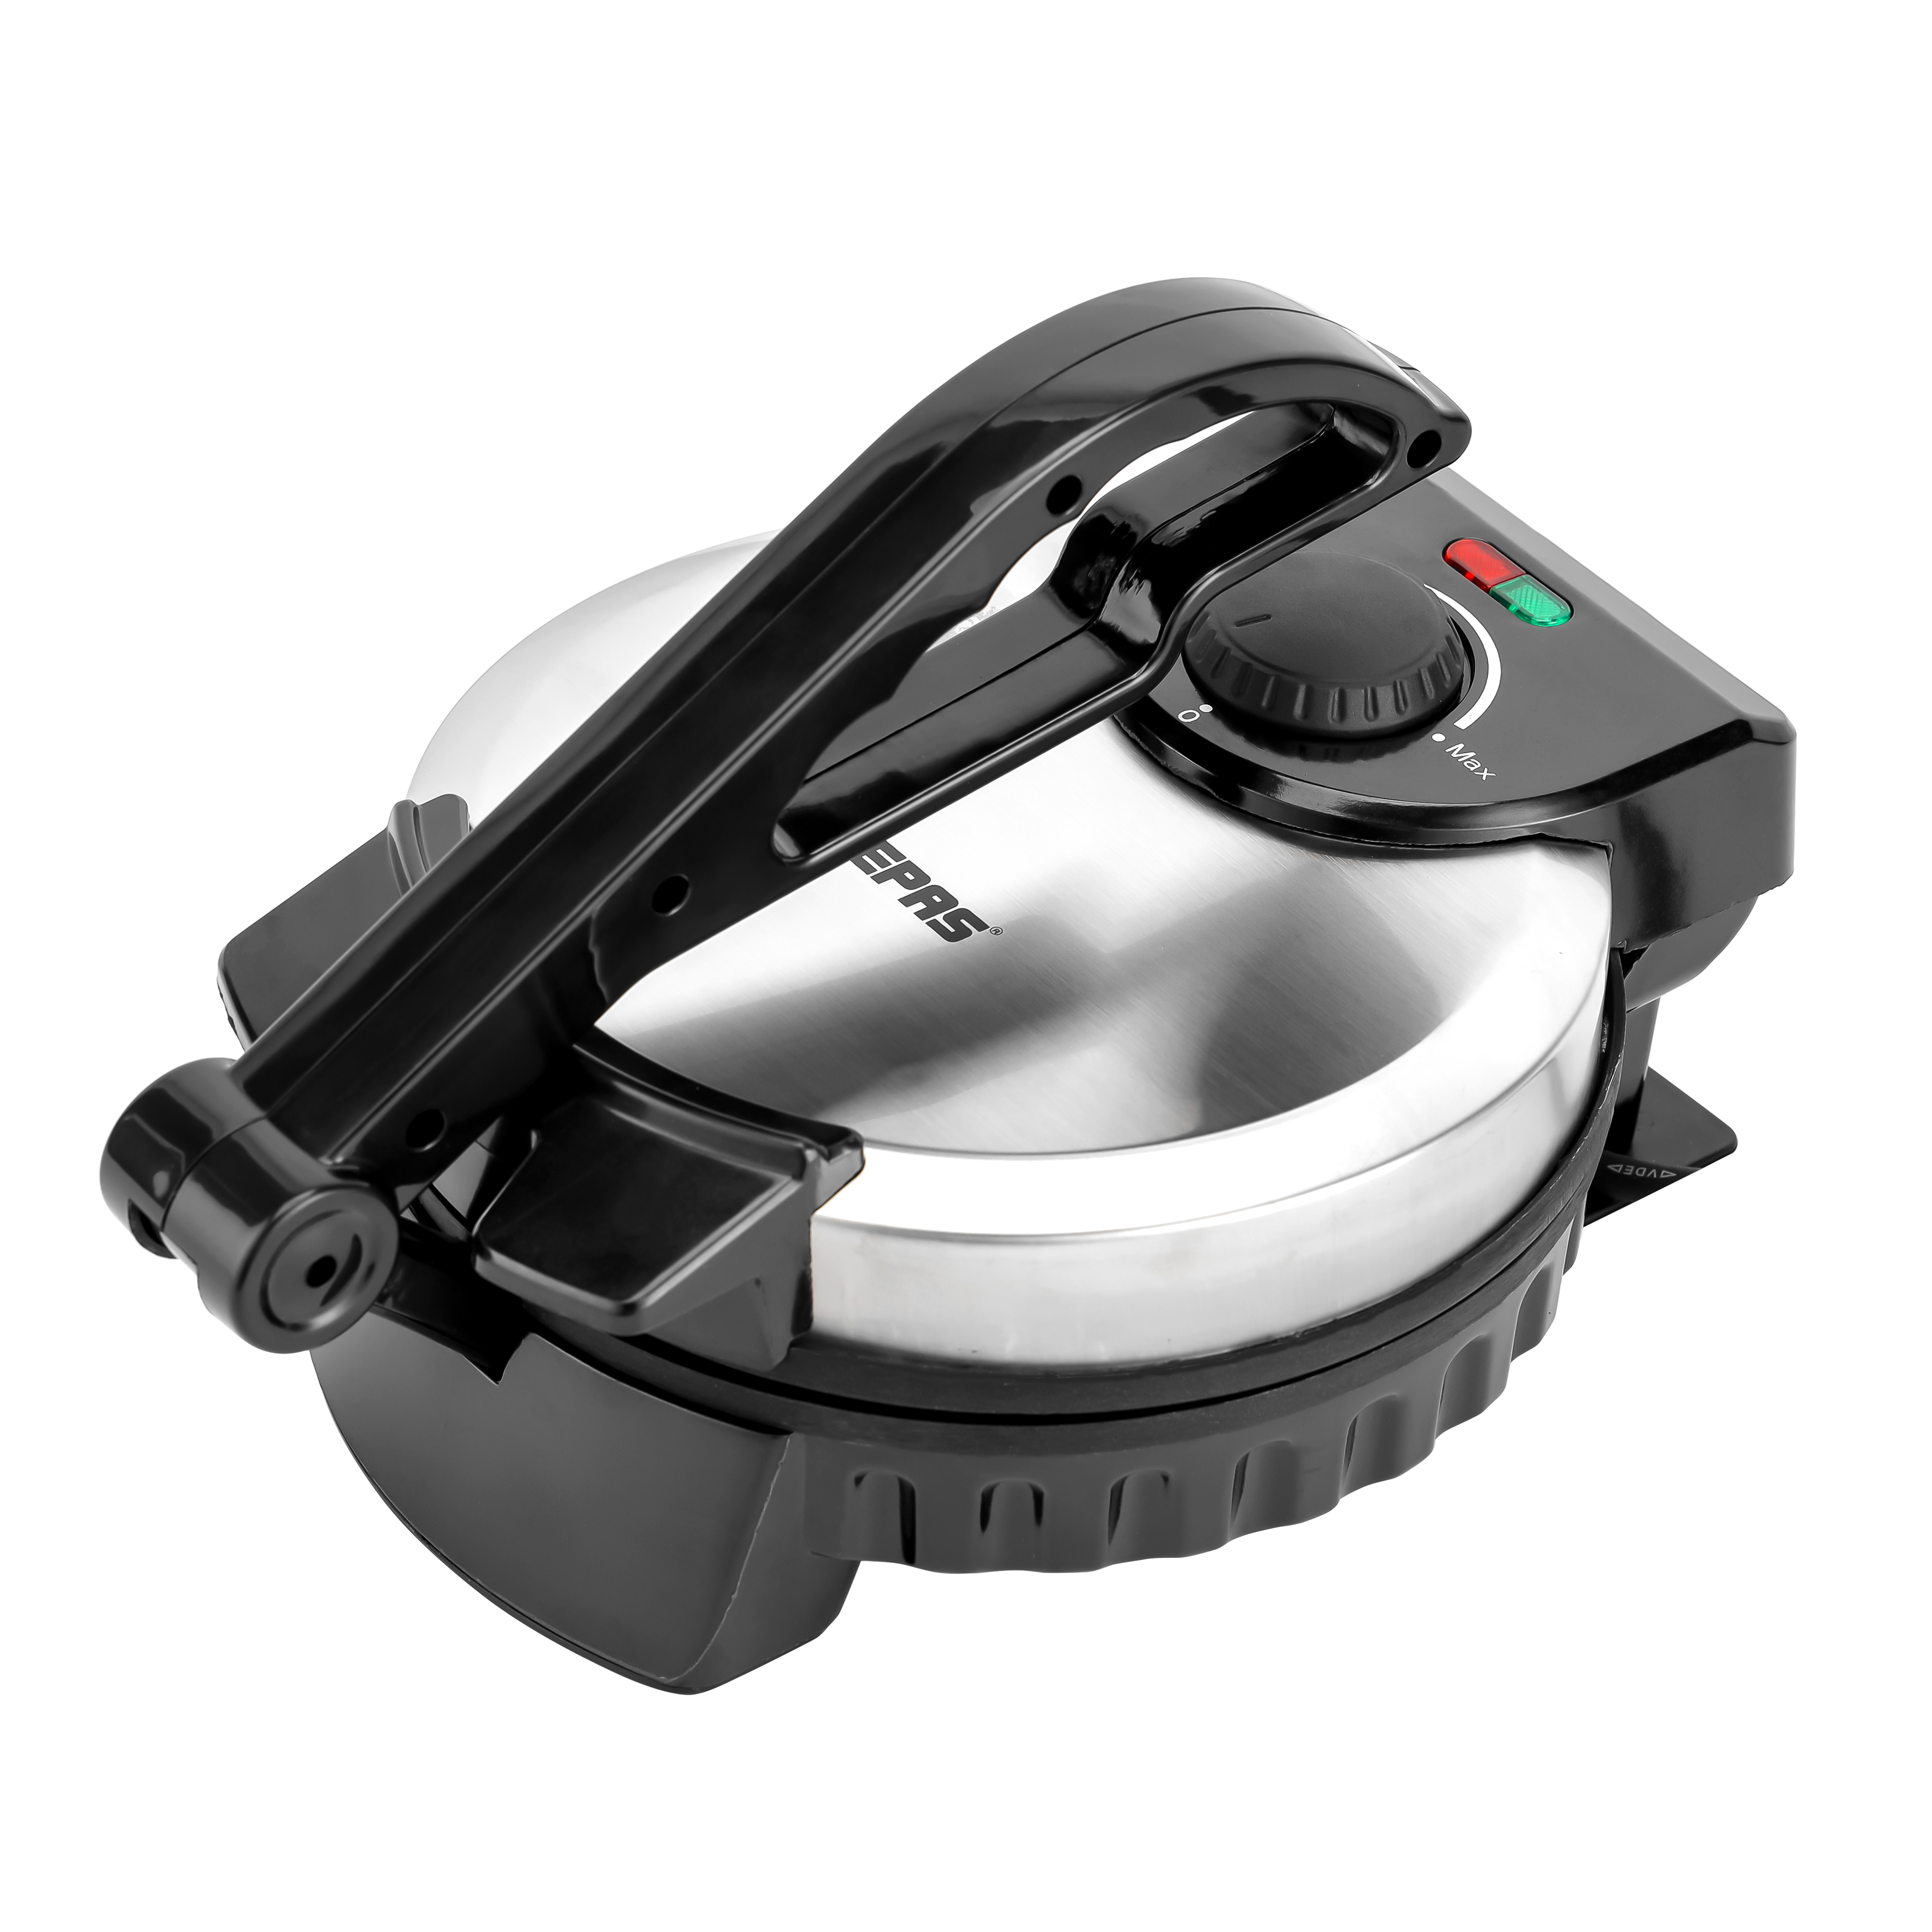 Geepas 1000W Omelette Maker - Electric Cooker with Non-Stick Plate -  Automatic Temperature Control & Power Light